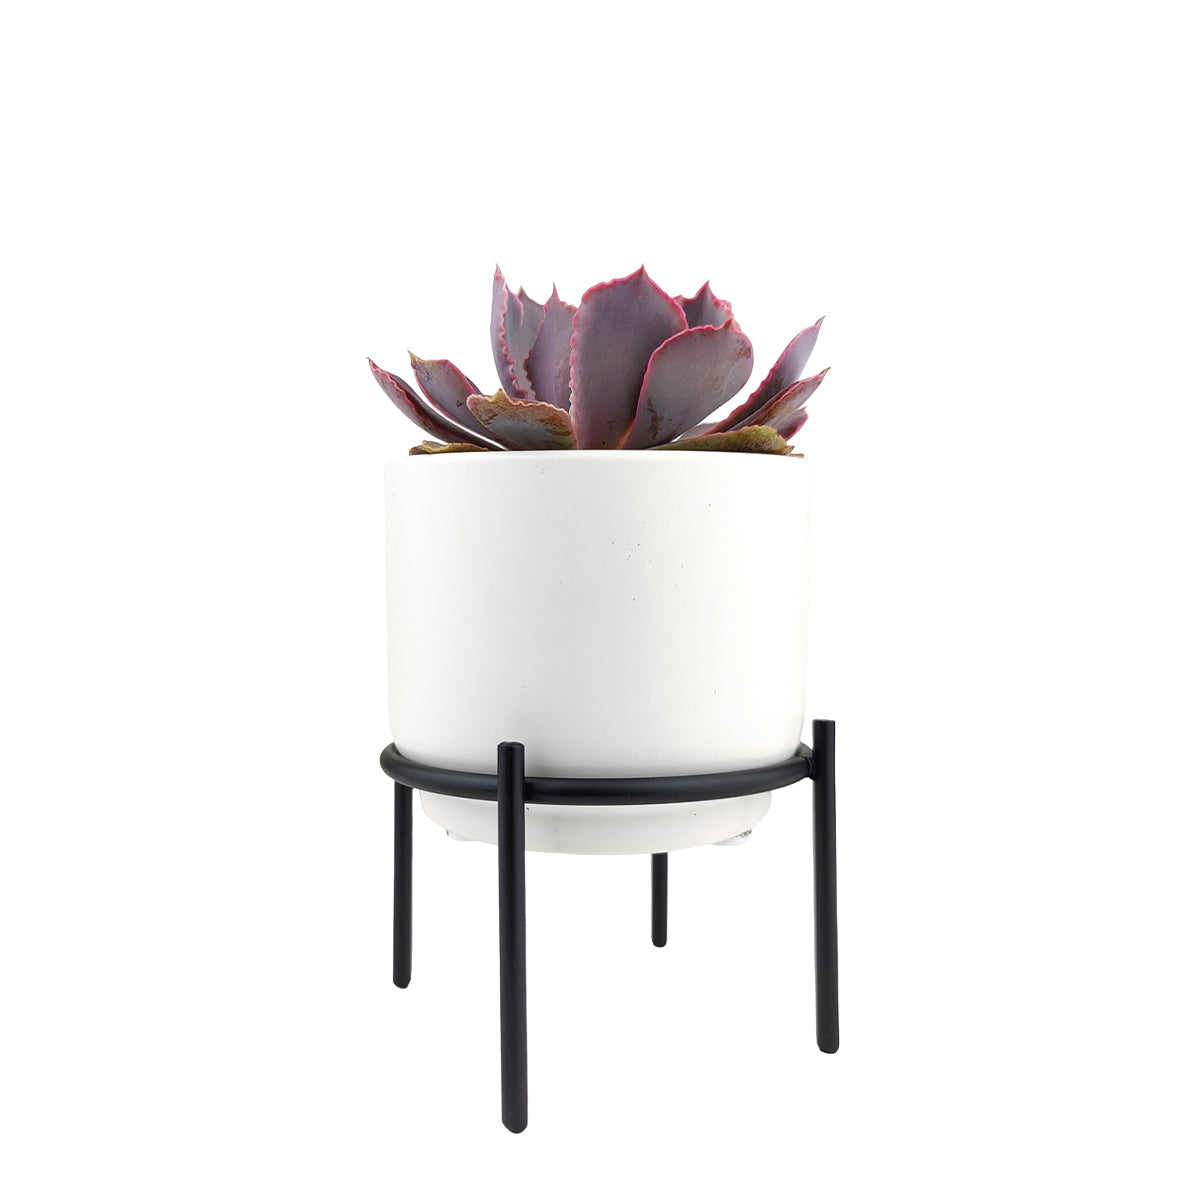 4 inch Solid White Ceramic Planter with Metal Stand